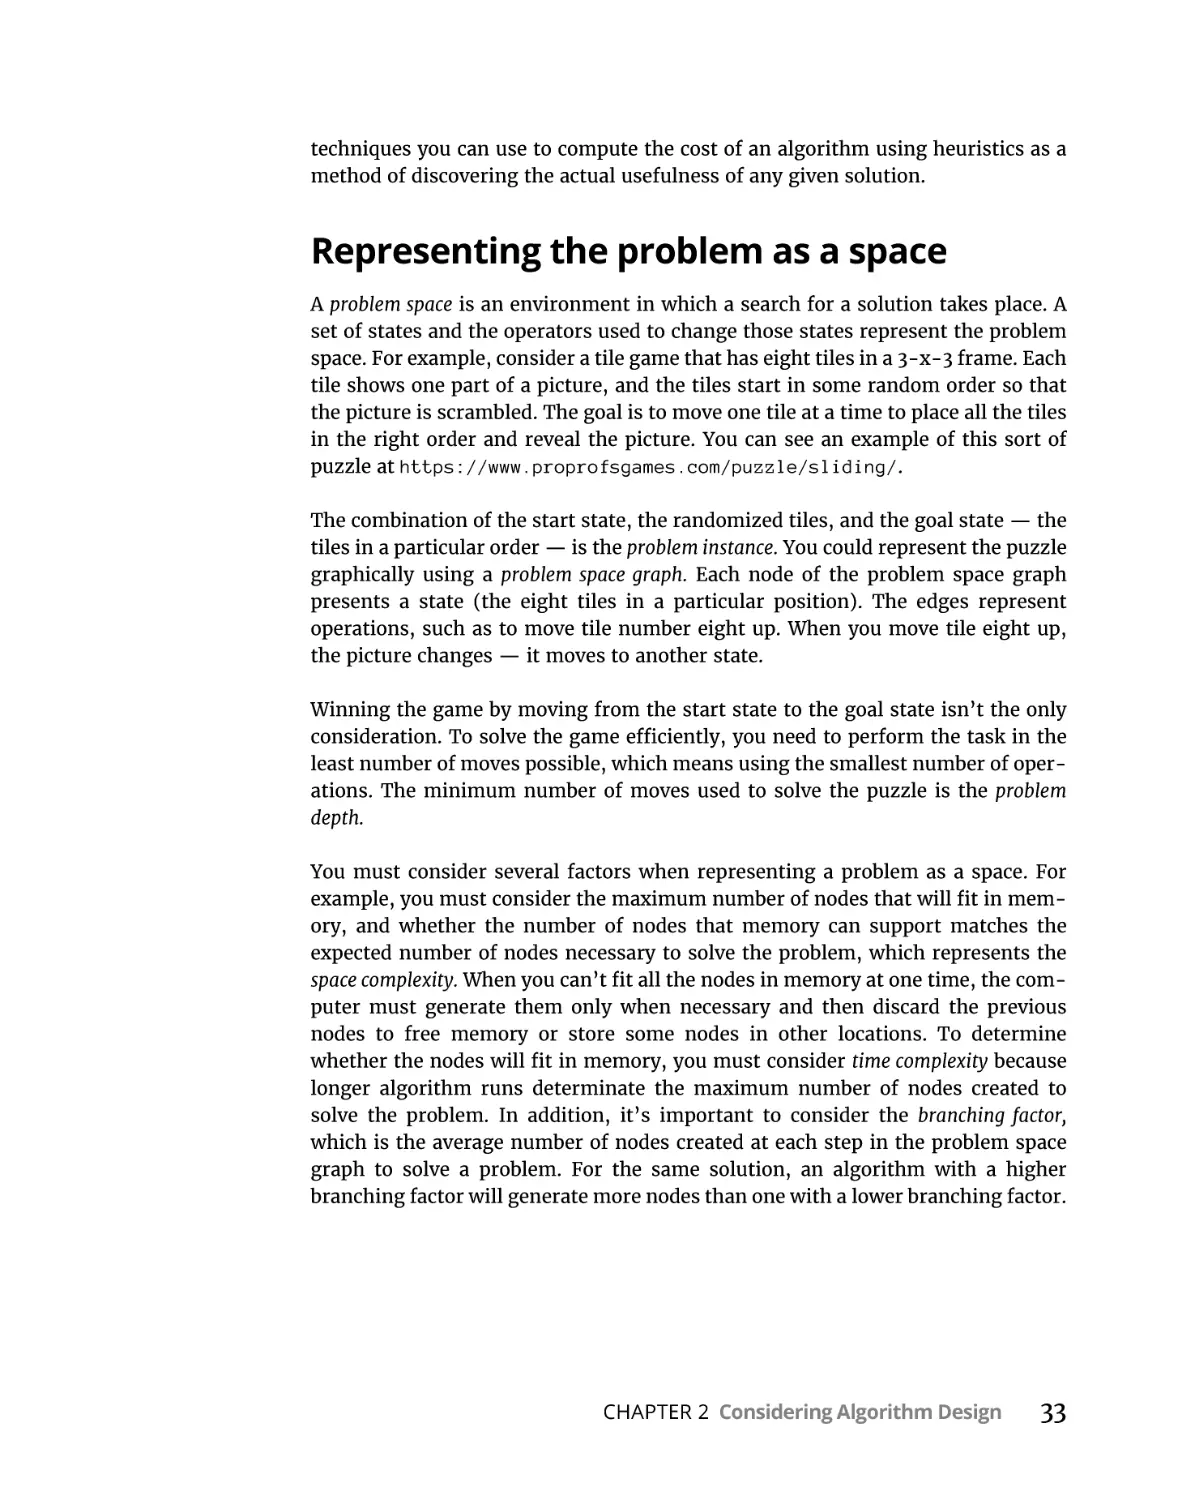 Representing the problem as a space